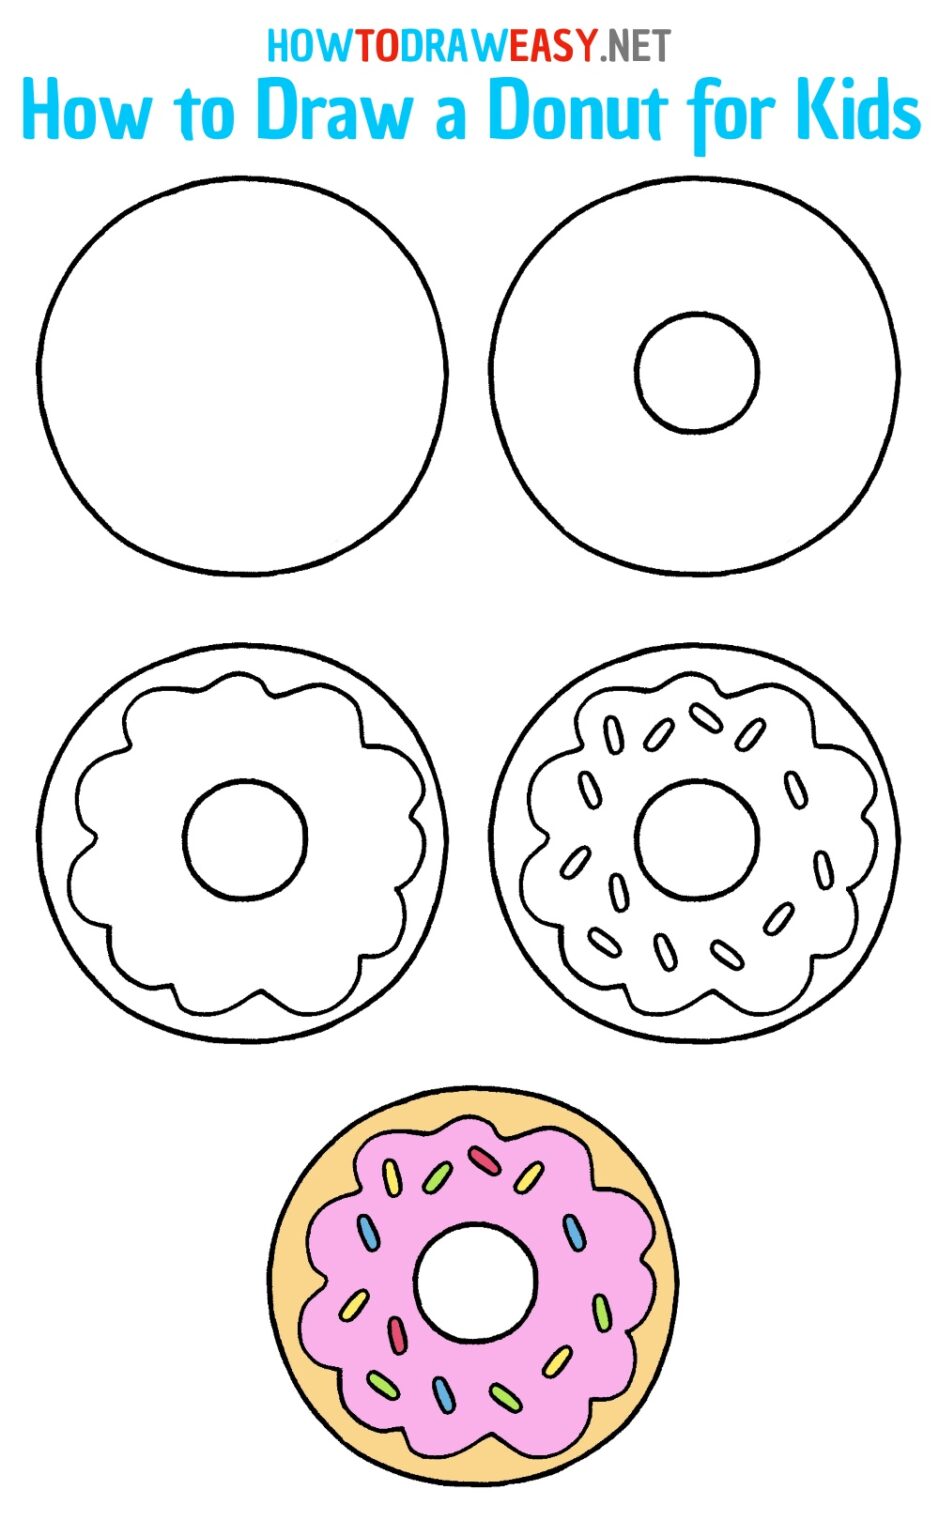 How to Draw a Donut for Kids How to Draw Easy